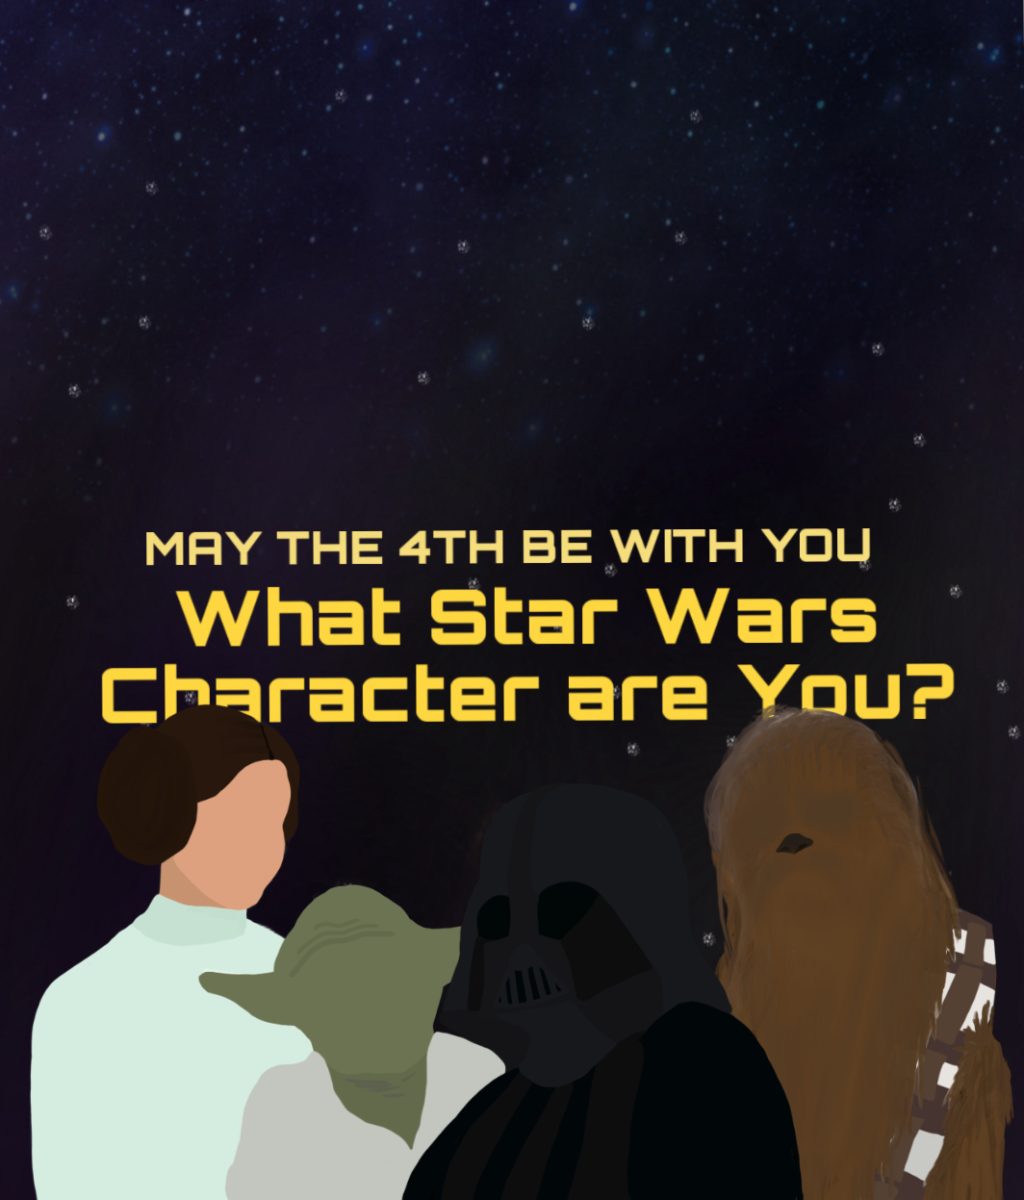 Take+this+quiz+to+figure+out+what+Star+Wars+character+you+are+-+may+the+force+be+with+you.